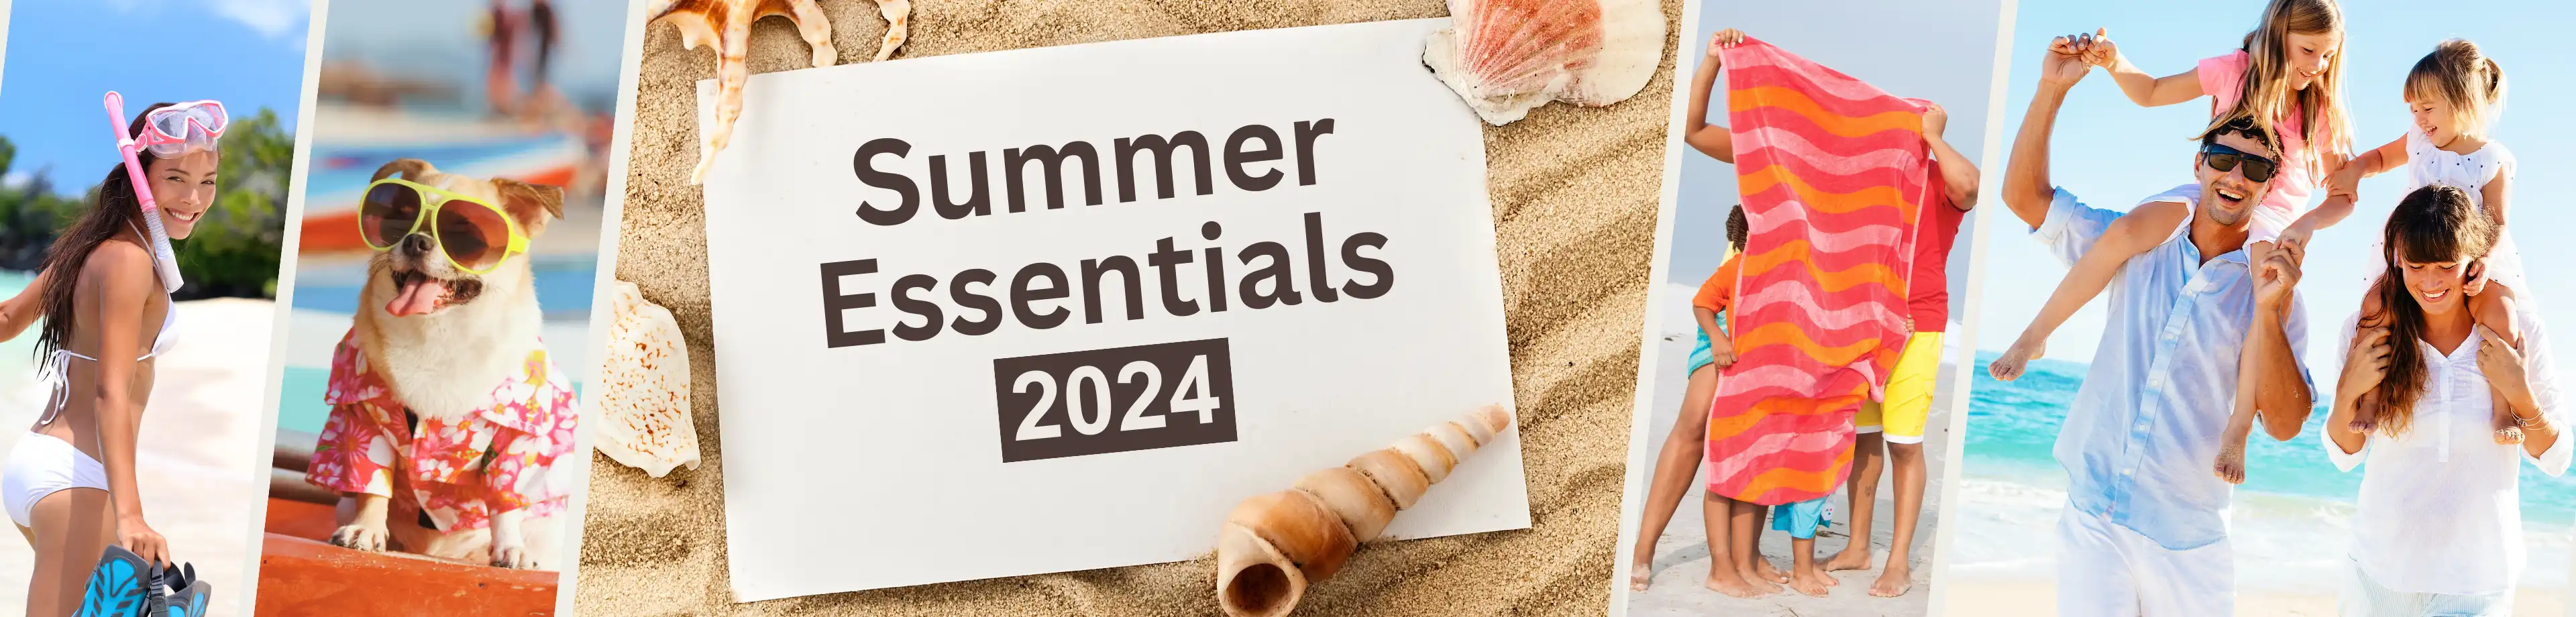 Summer Essentials 2024 - We have everything you need to get your brand awareness out into the sun this season!